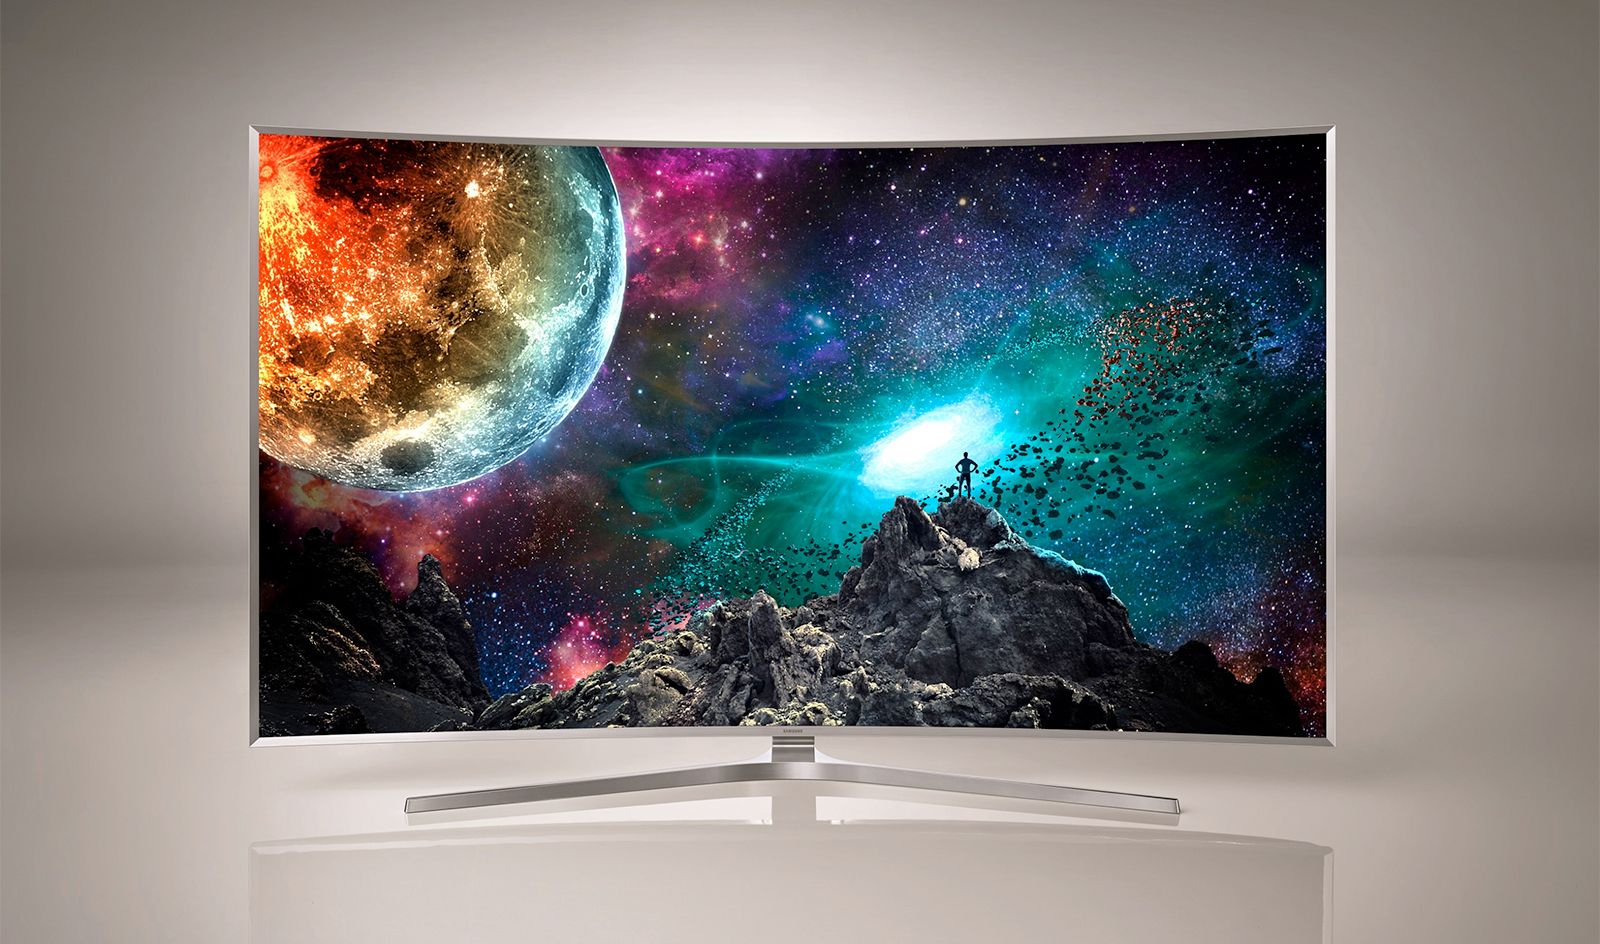 samsung suhd tvs 4k resolution meets quantum dot tech for affordable ultra high definition in 2015 image 2